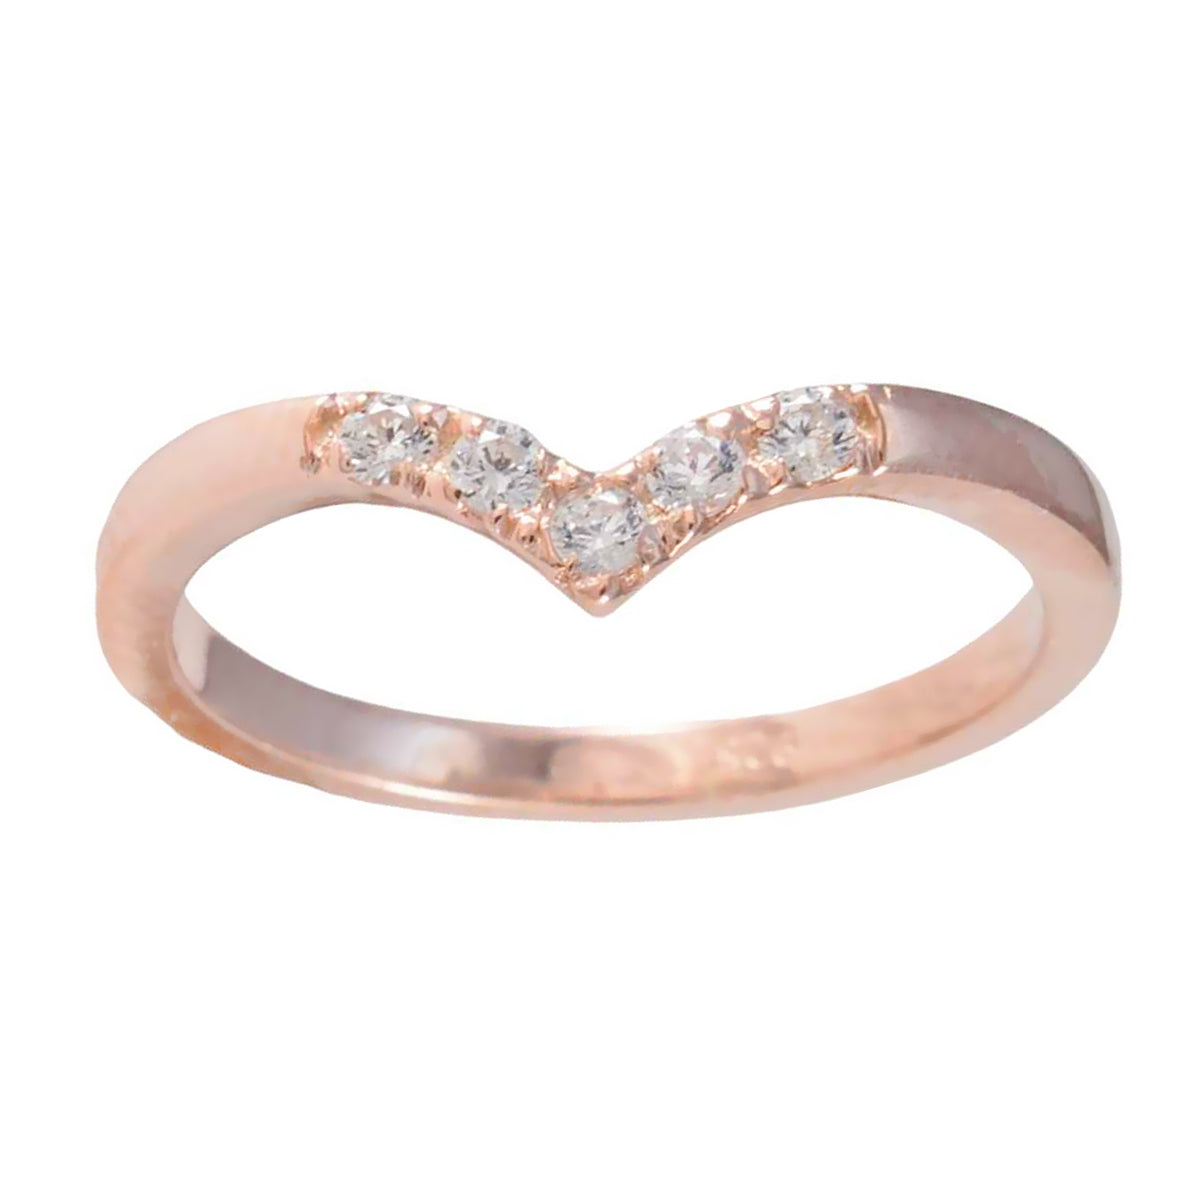 Riyo Adorable Silver Ring With Rose Gold Plating White CZ Stone Round Shape Prong Setting Handamde Jewelry New Year Ring